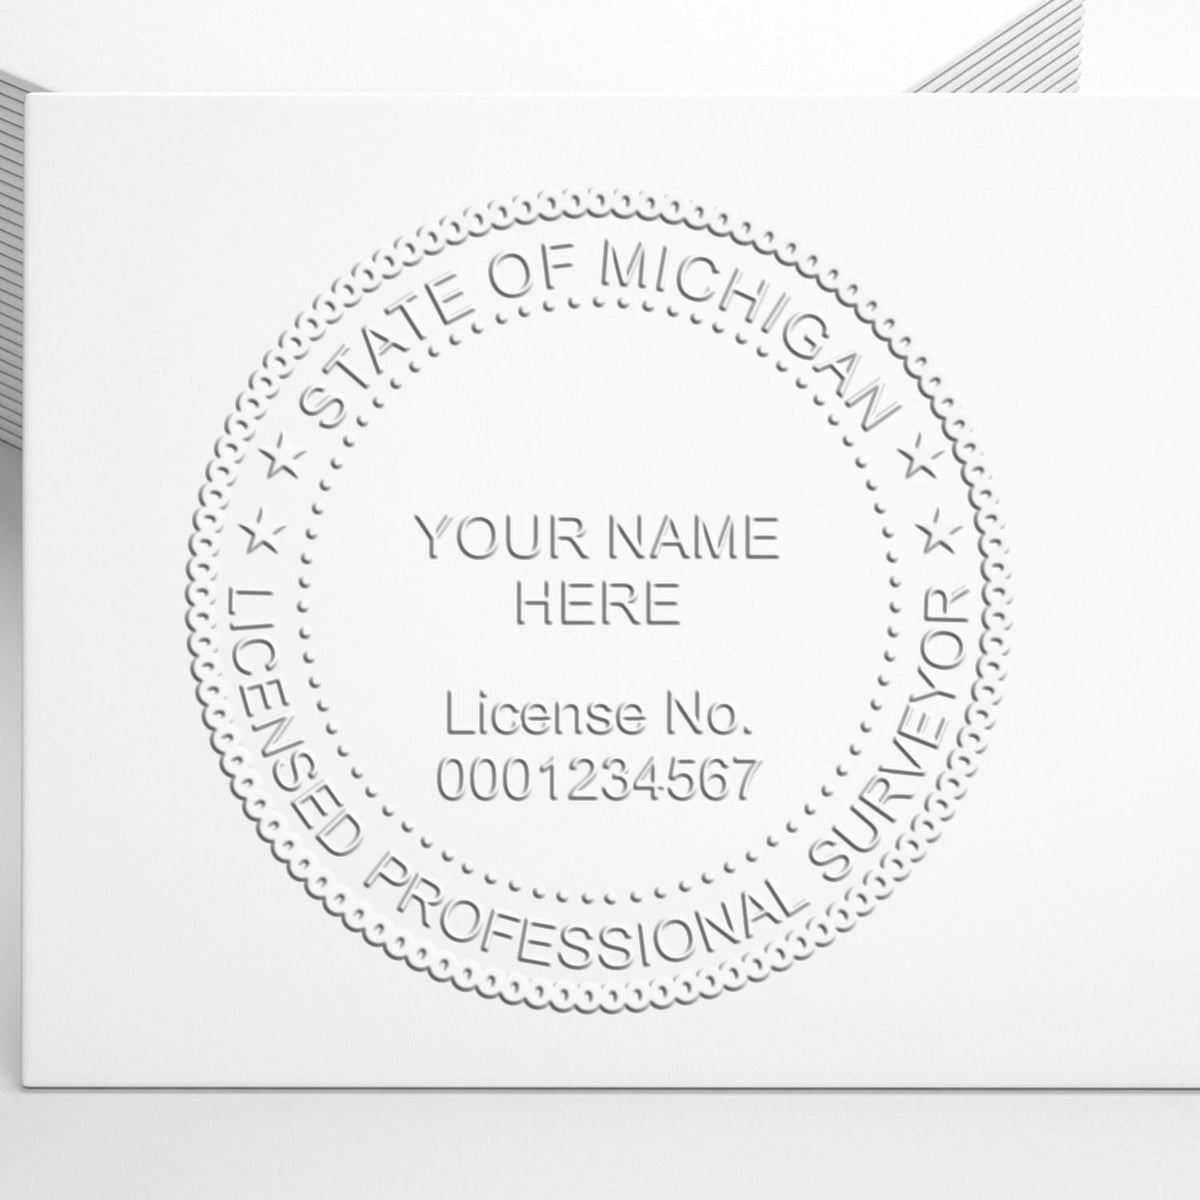 The Gift Michigan Land Surveyor Seal stamp impression comes to life with a crisp, detailed image stamped on paper - showcasing true professional quality.